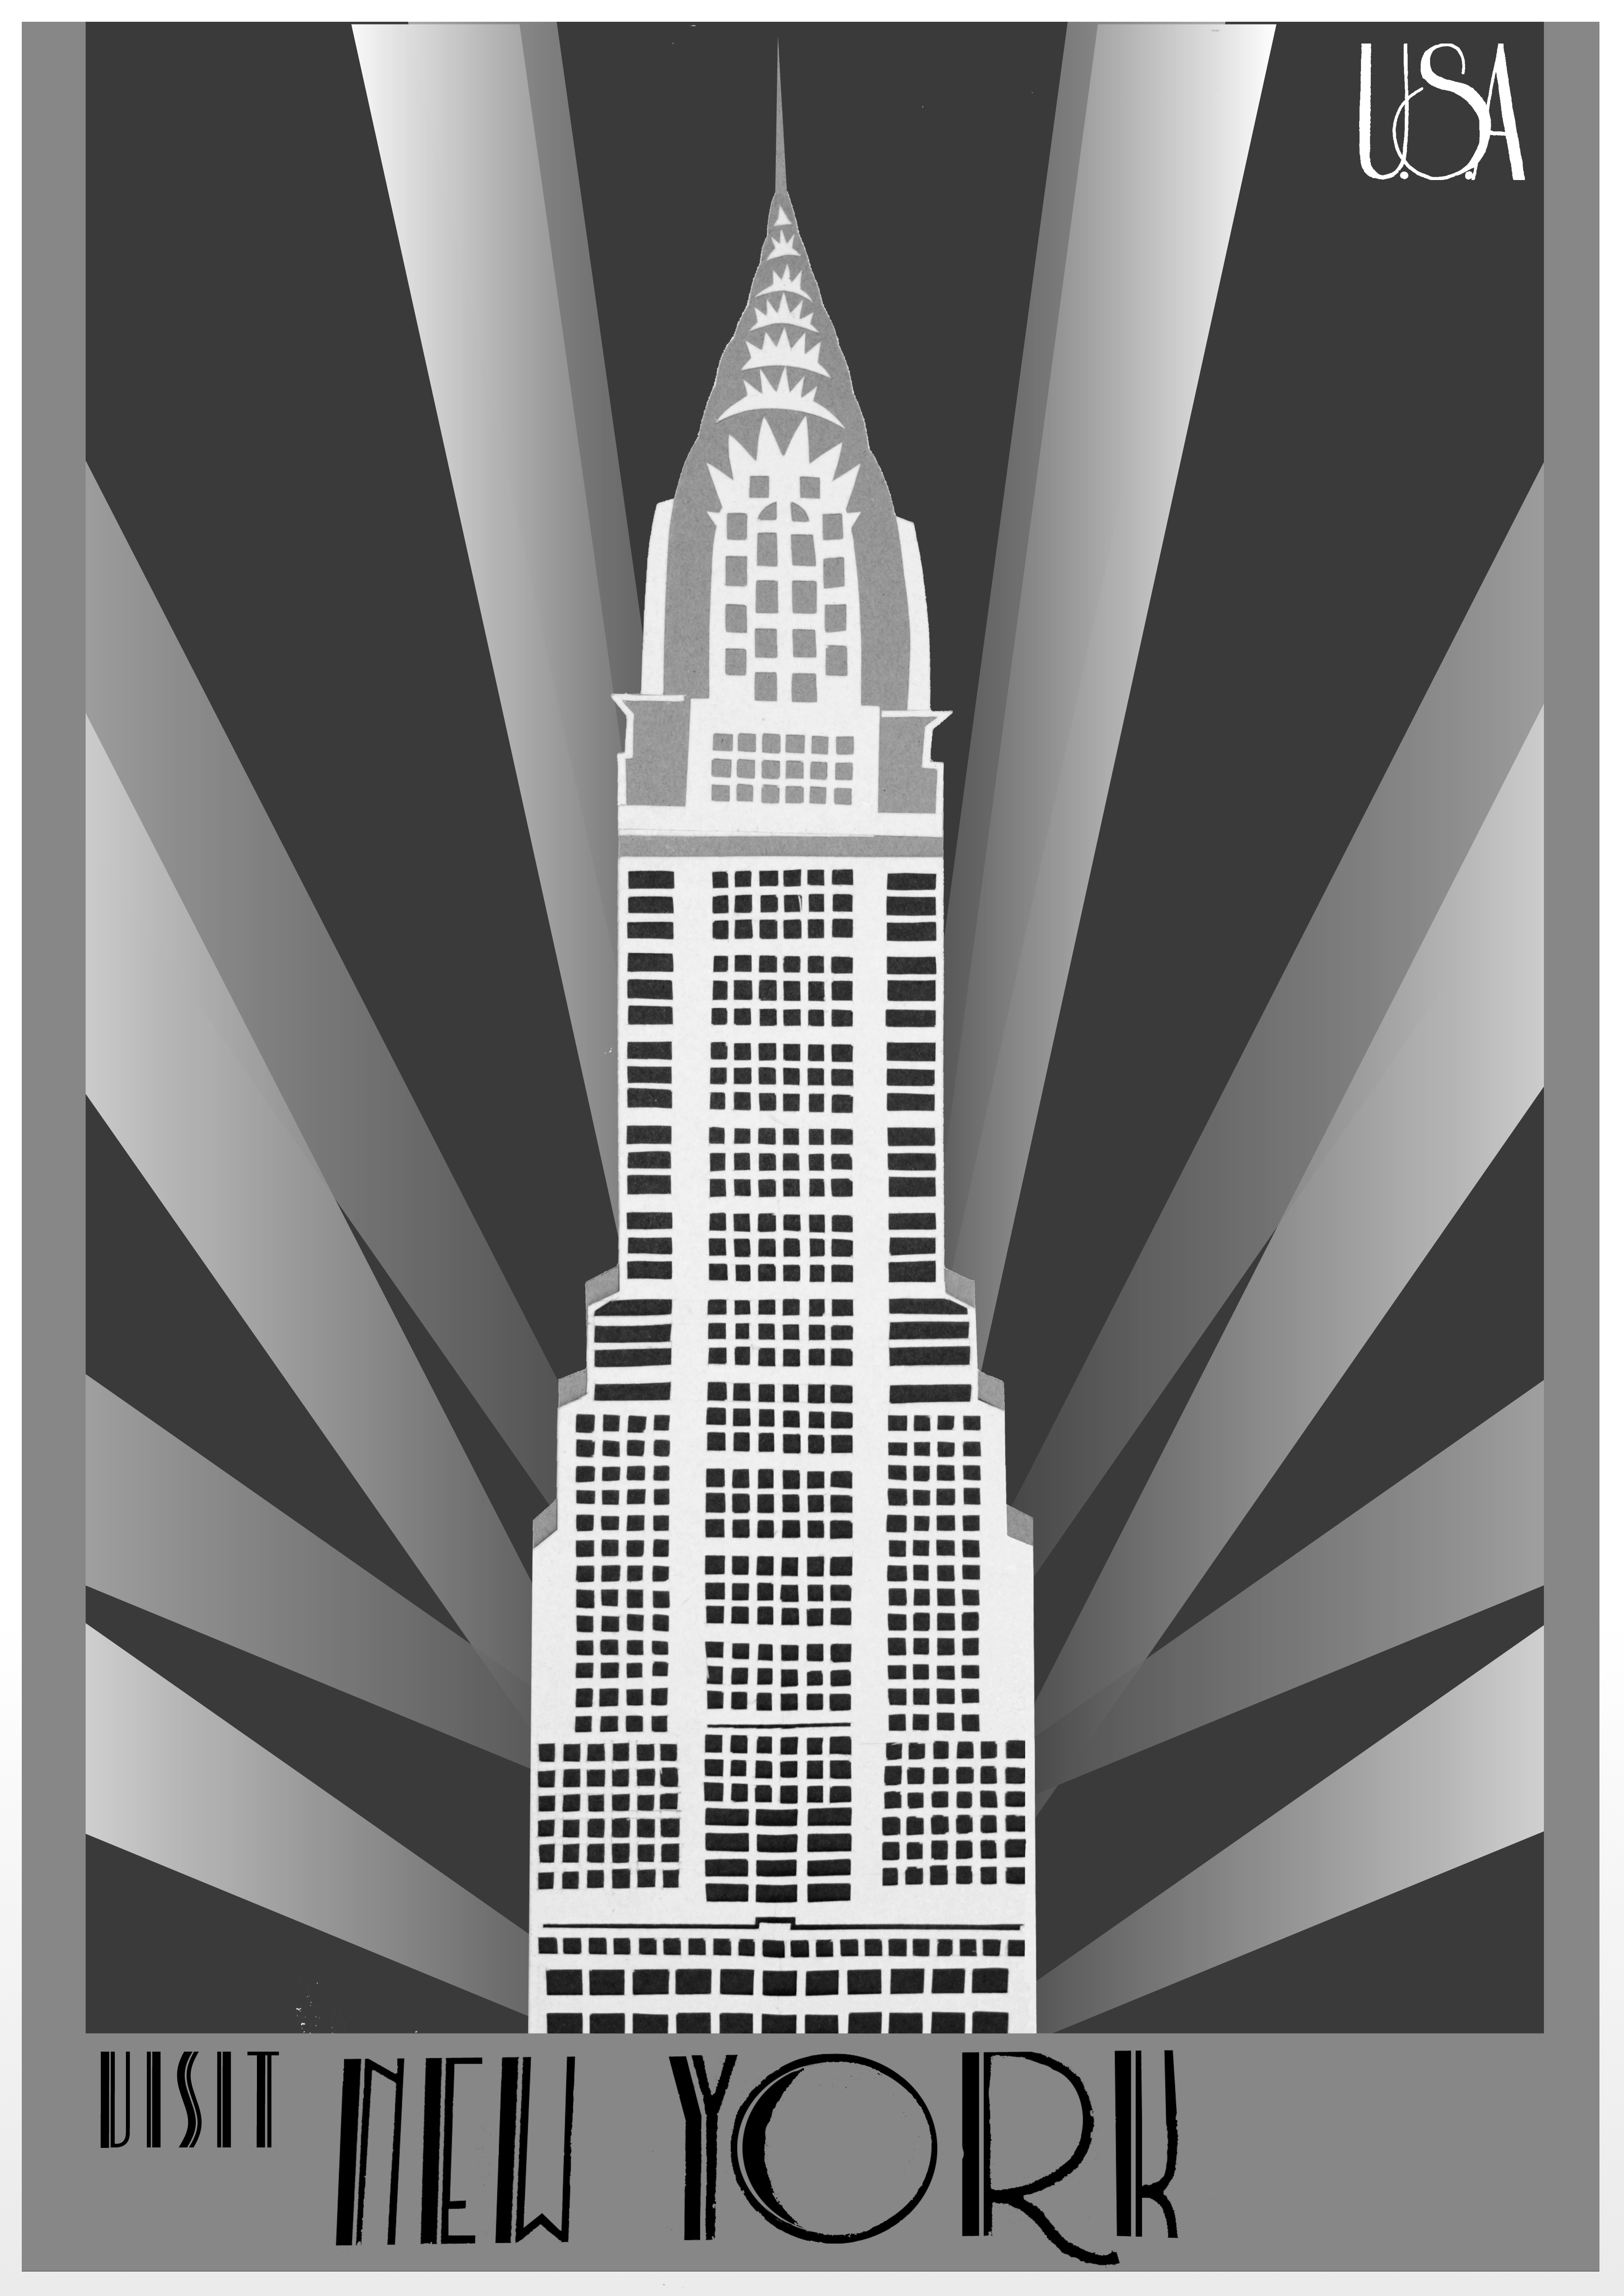 Art deco features of the chrysler building